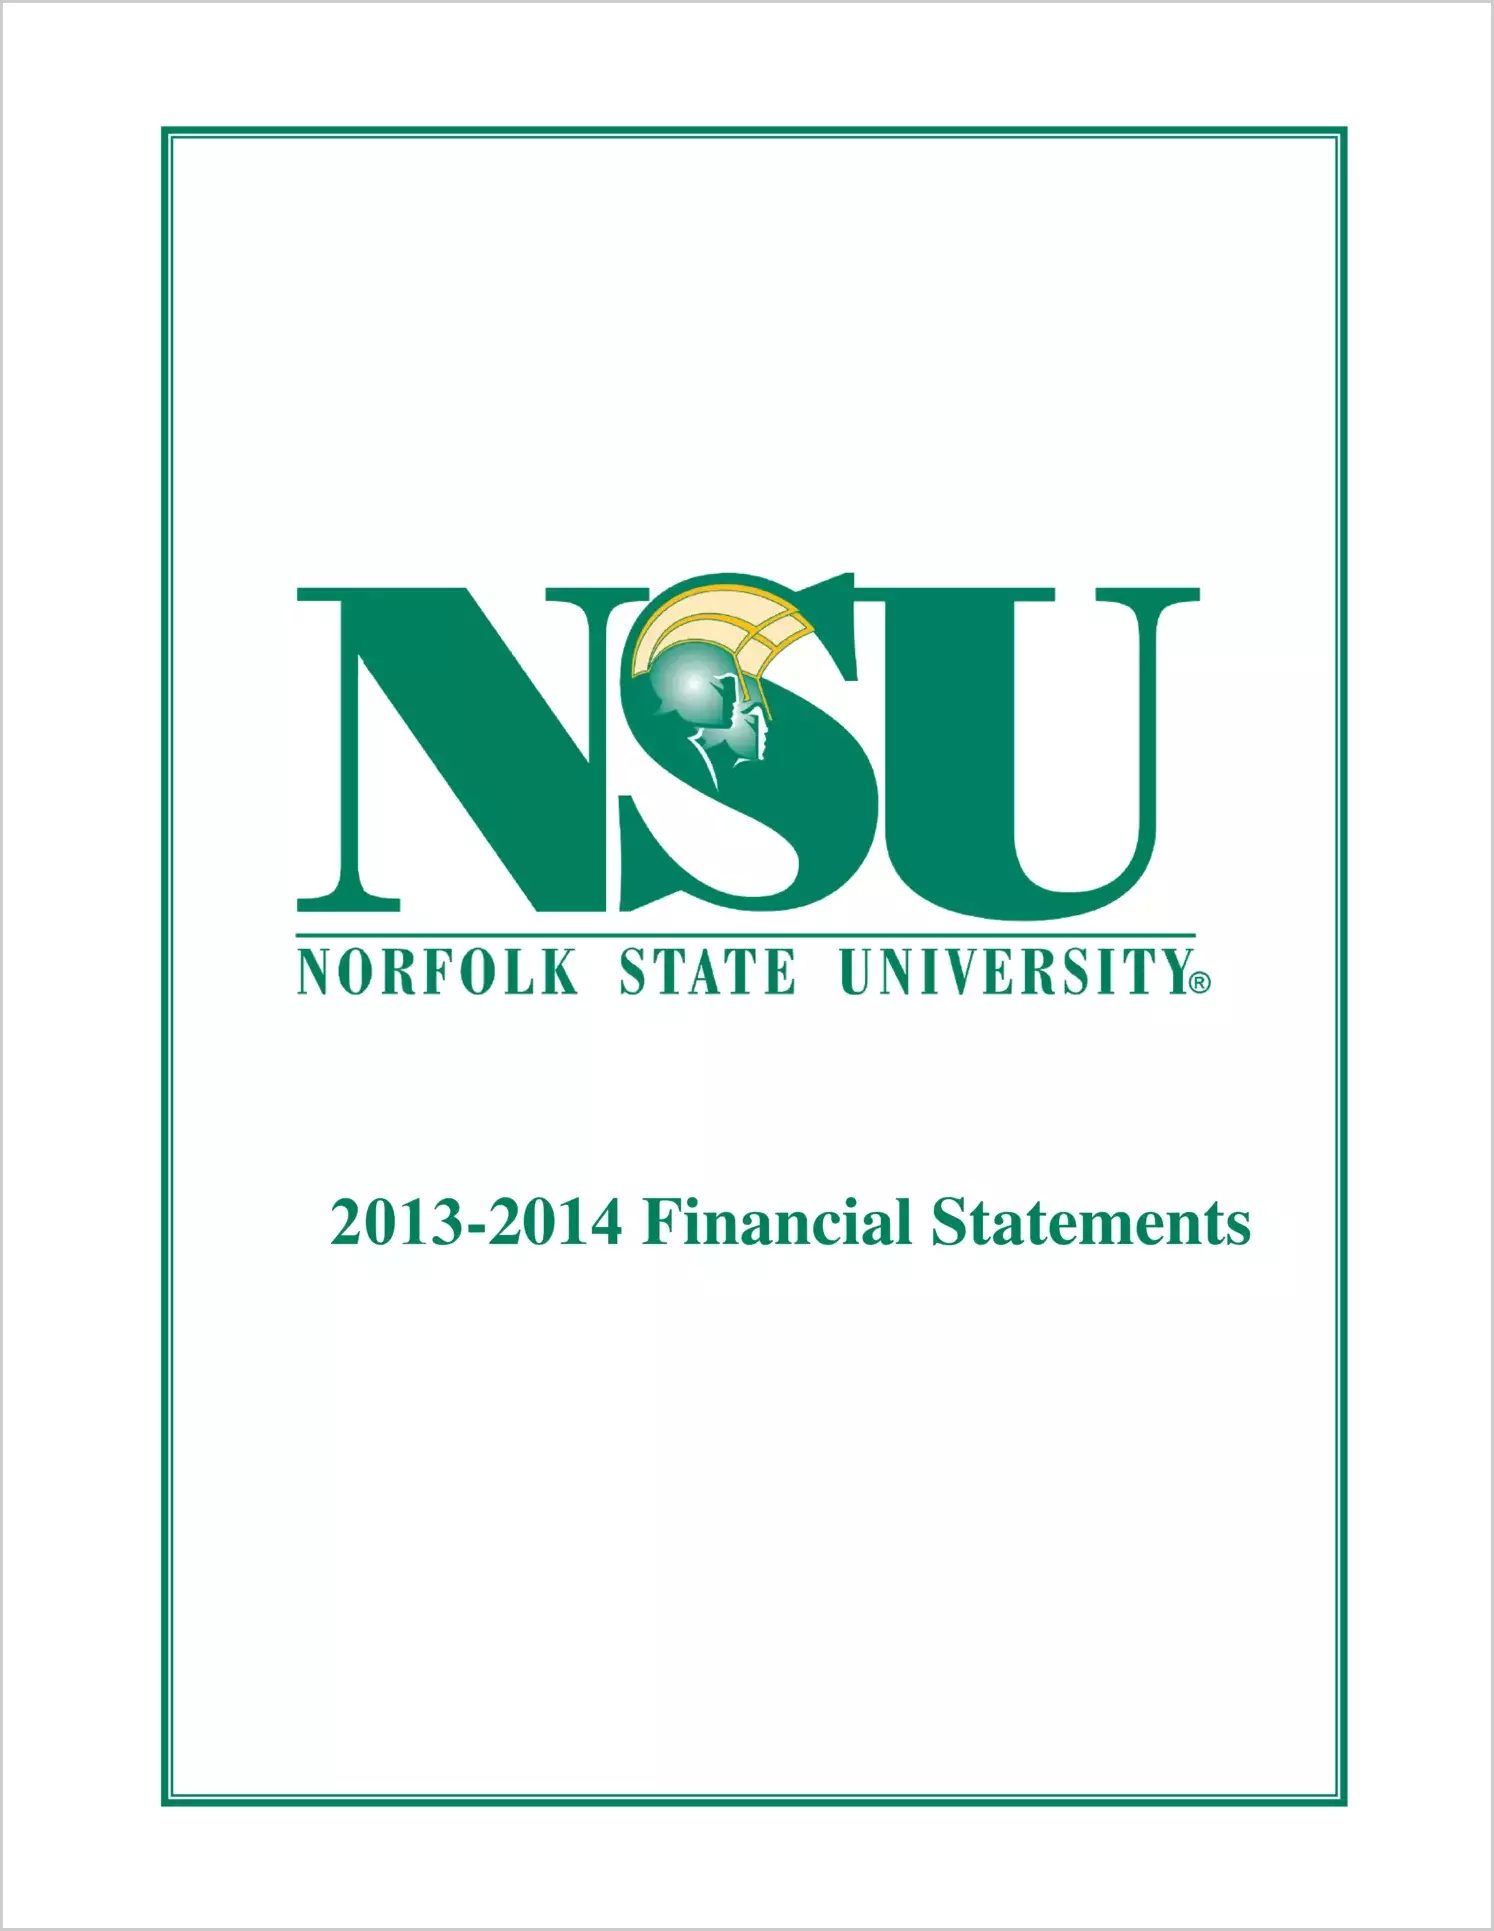 Norfolk State University Financial Statement Report for the year ended June 30, 2014